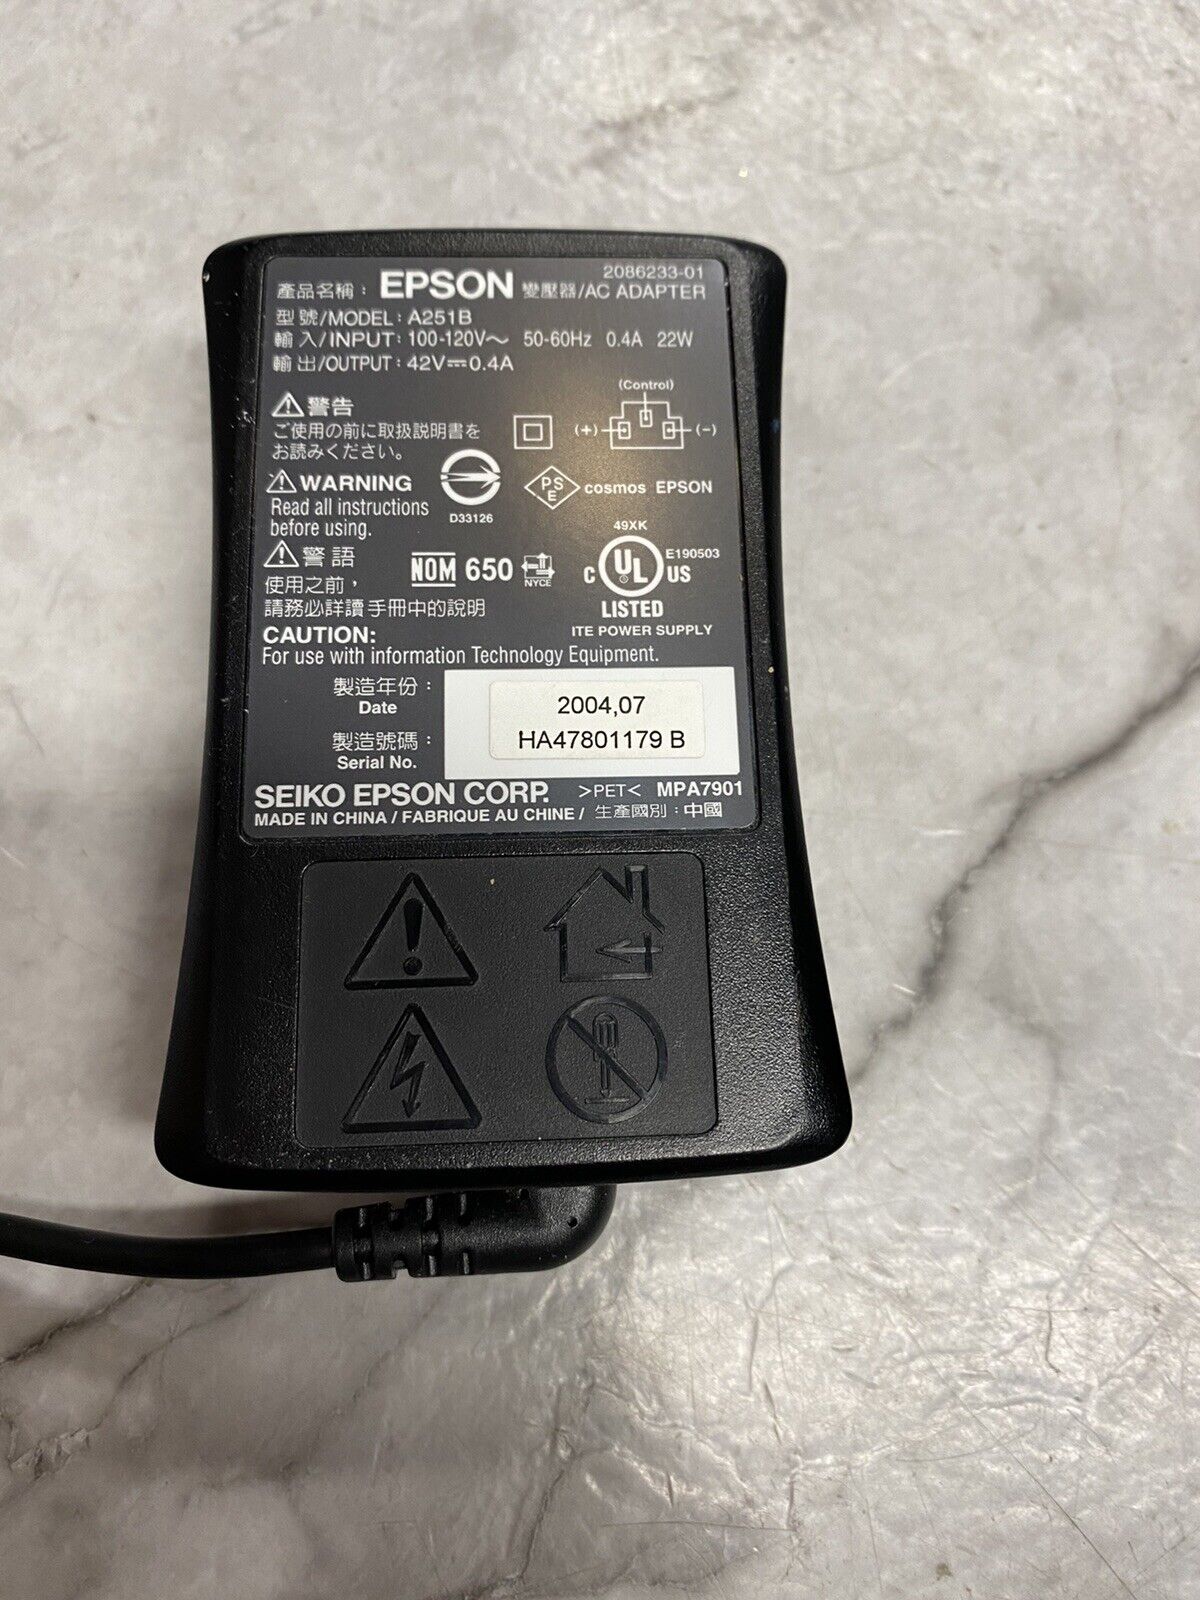 *Brand NEW*Genuine Epson PictureMate A251B 42V 0.4A 22W AC Adapter 2086233-01 POWER Supply